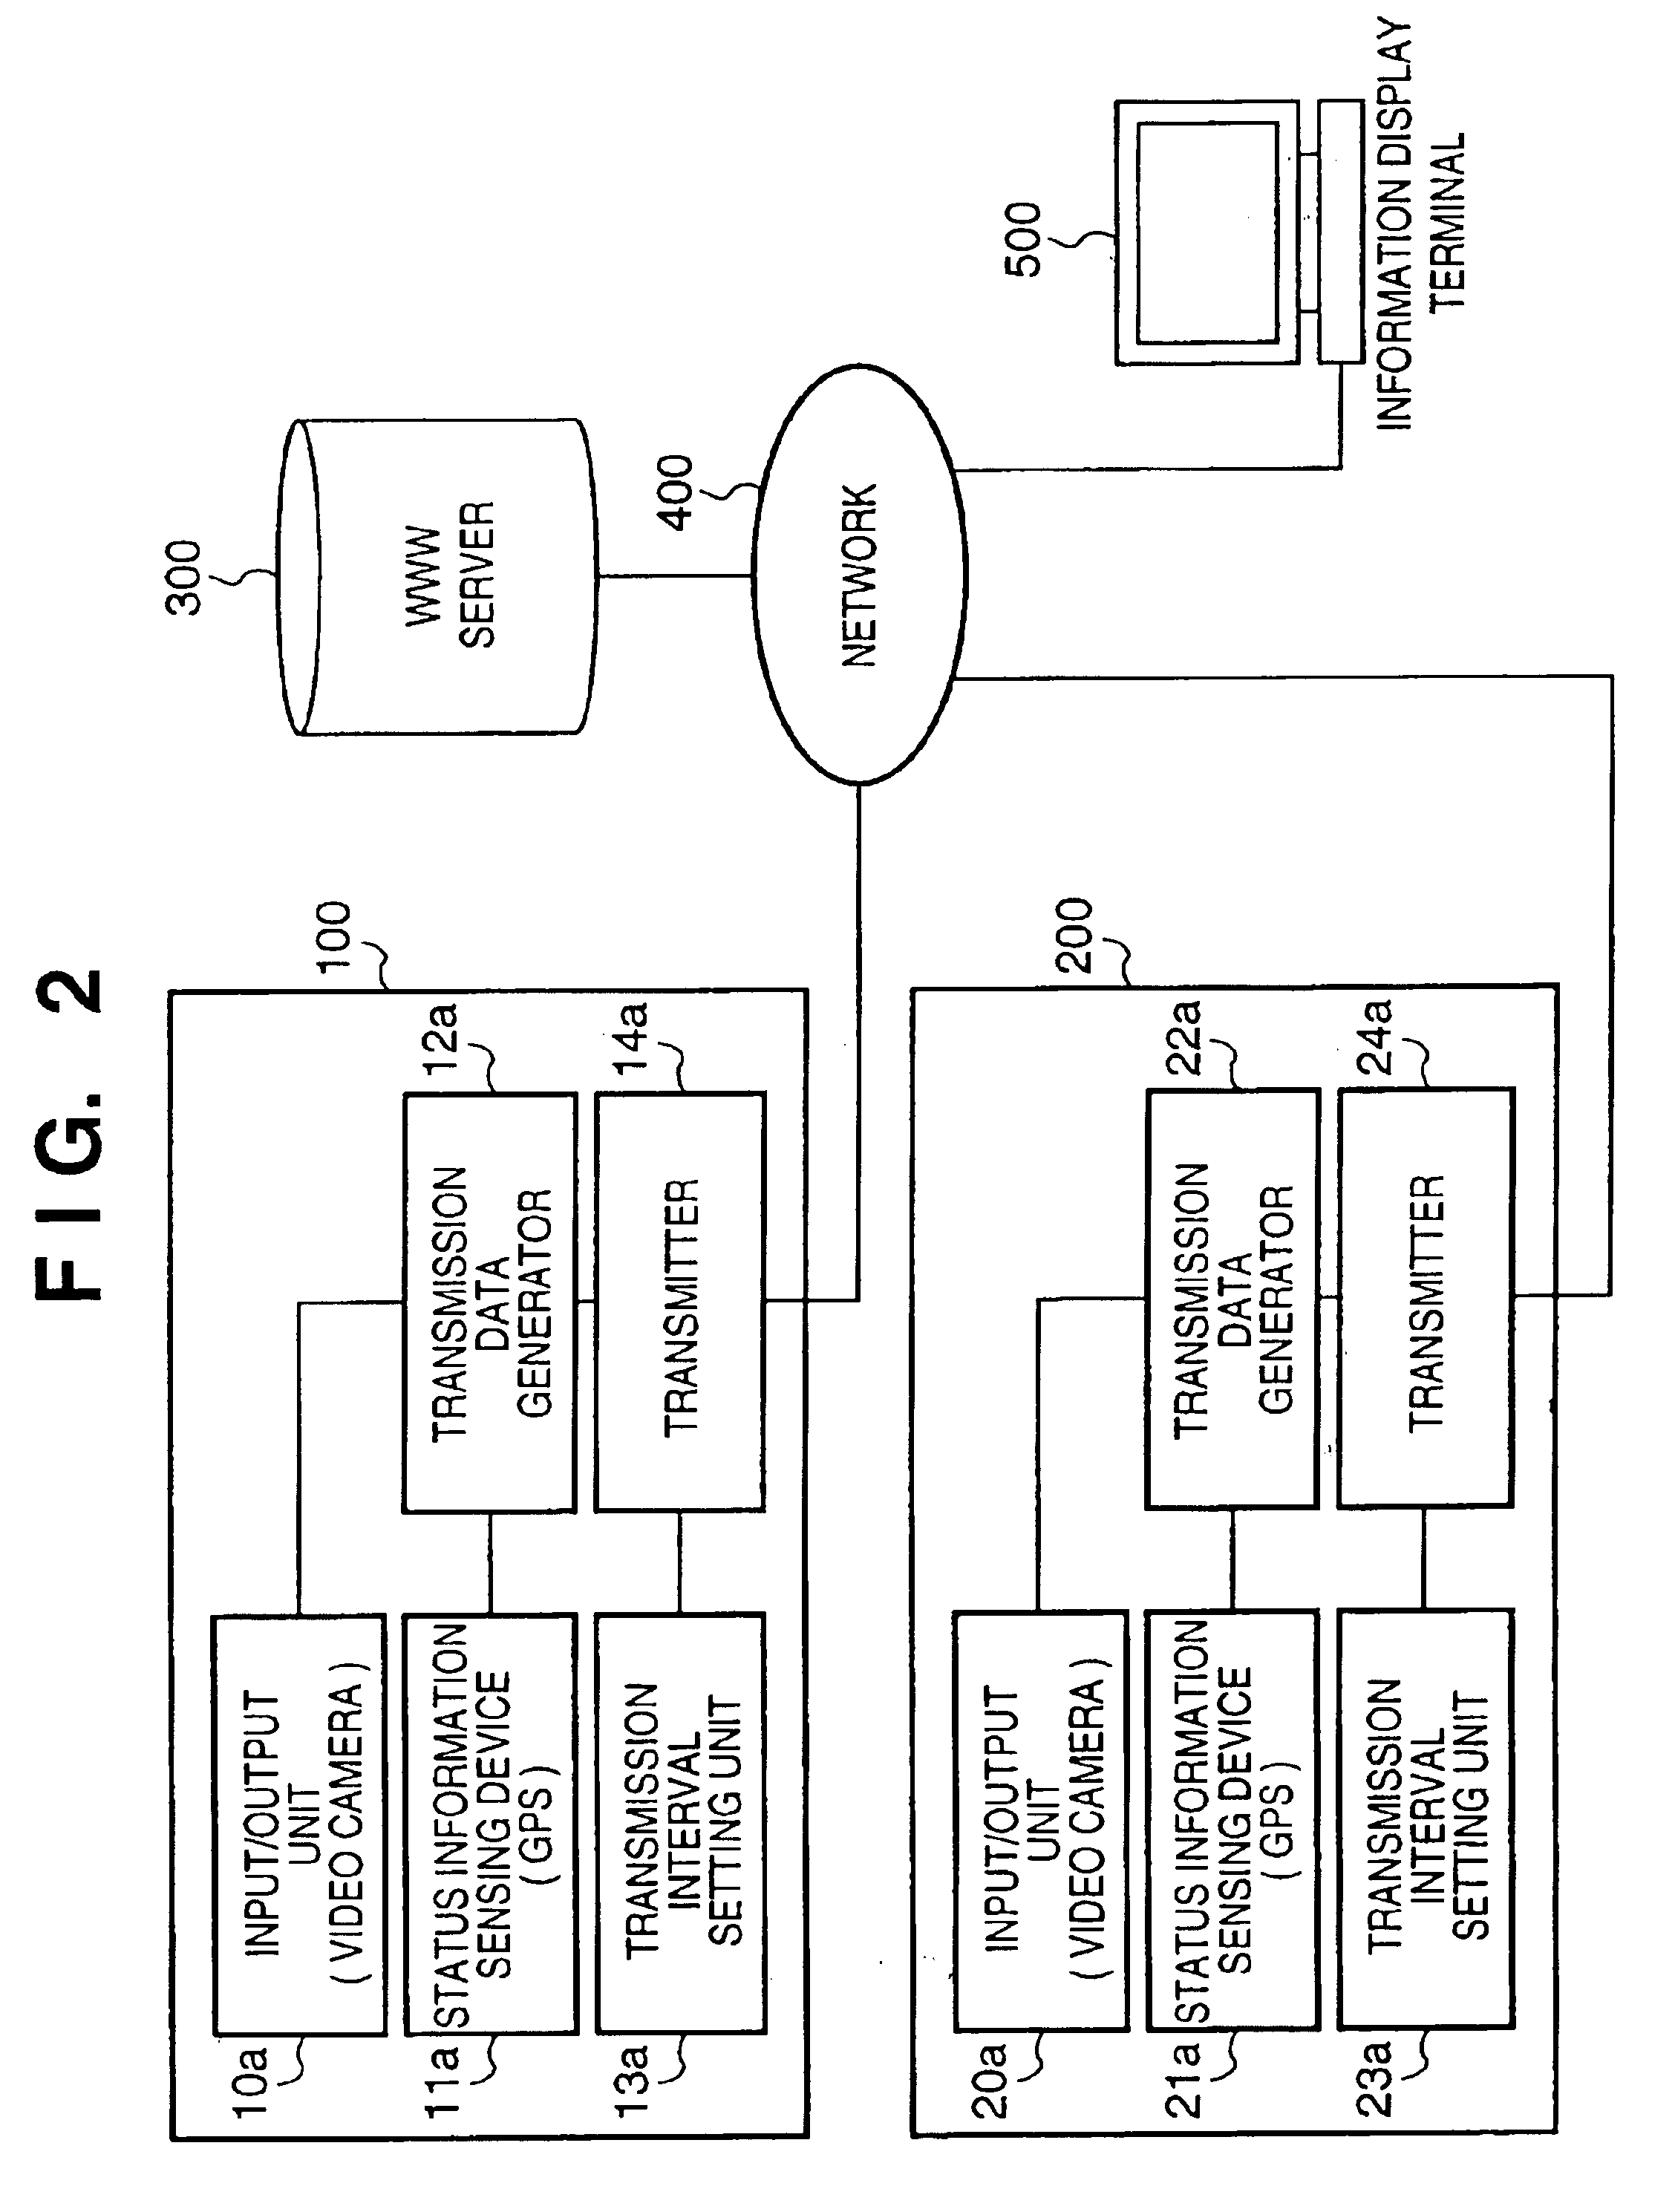 System for providing location information from a remote terminal and displaying on a map display as a URL